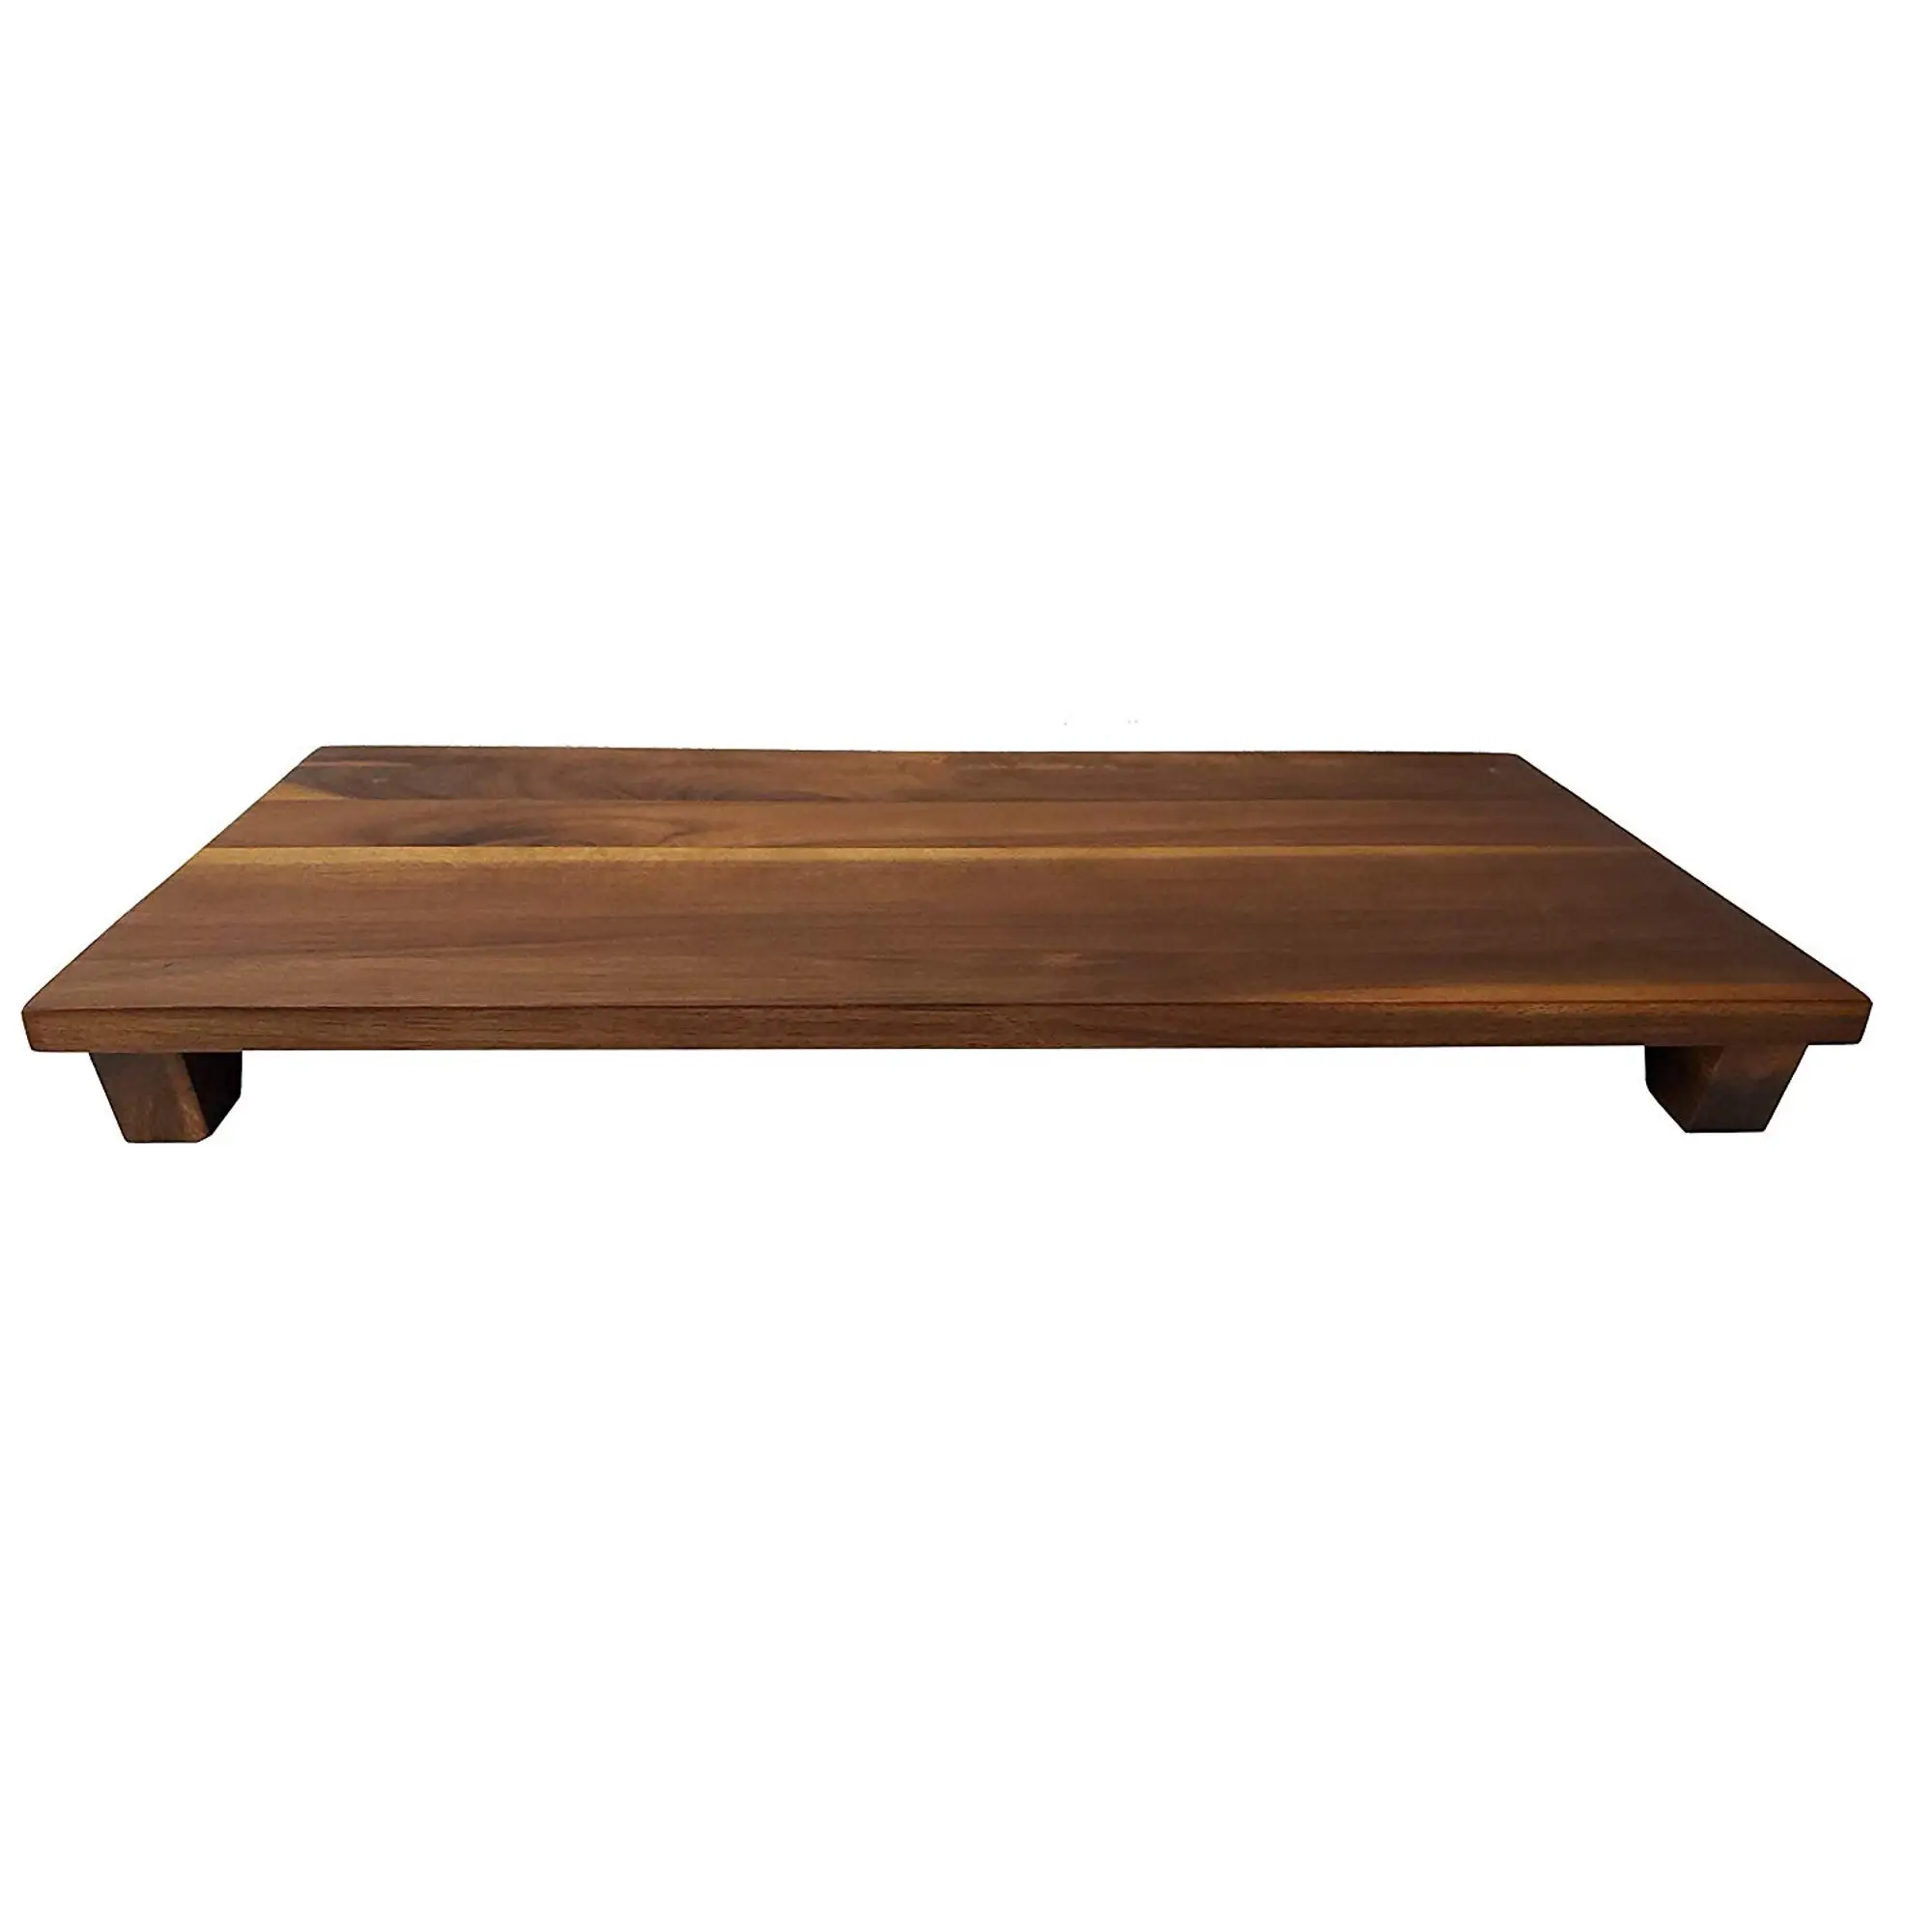 Acacia Wood Footed Serving Tray Wood Serving Board On Stand Rectangular Footed Wood Cutting Chopping Board Platter Tray